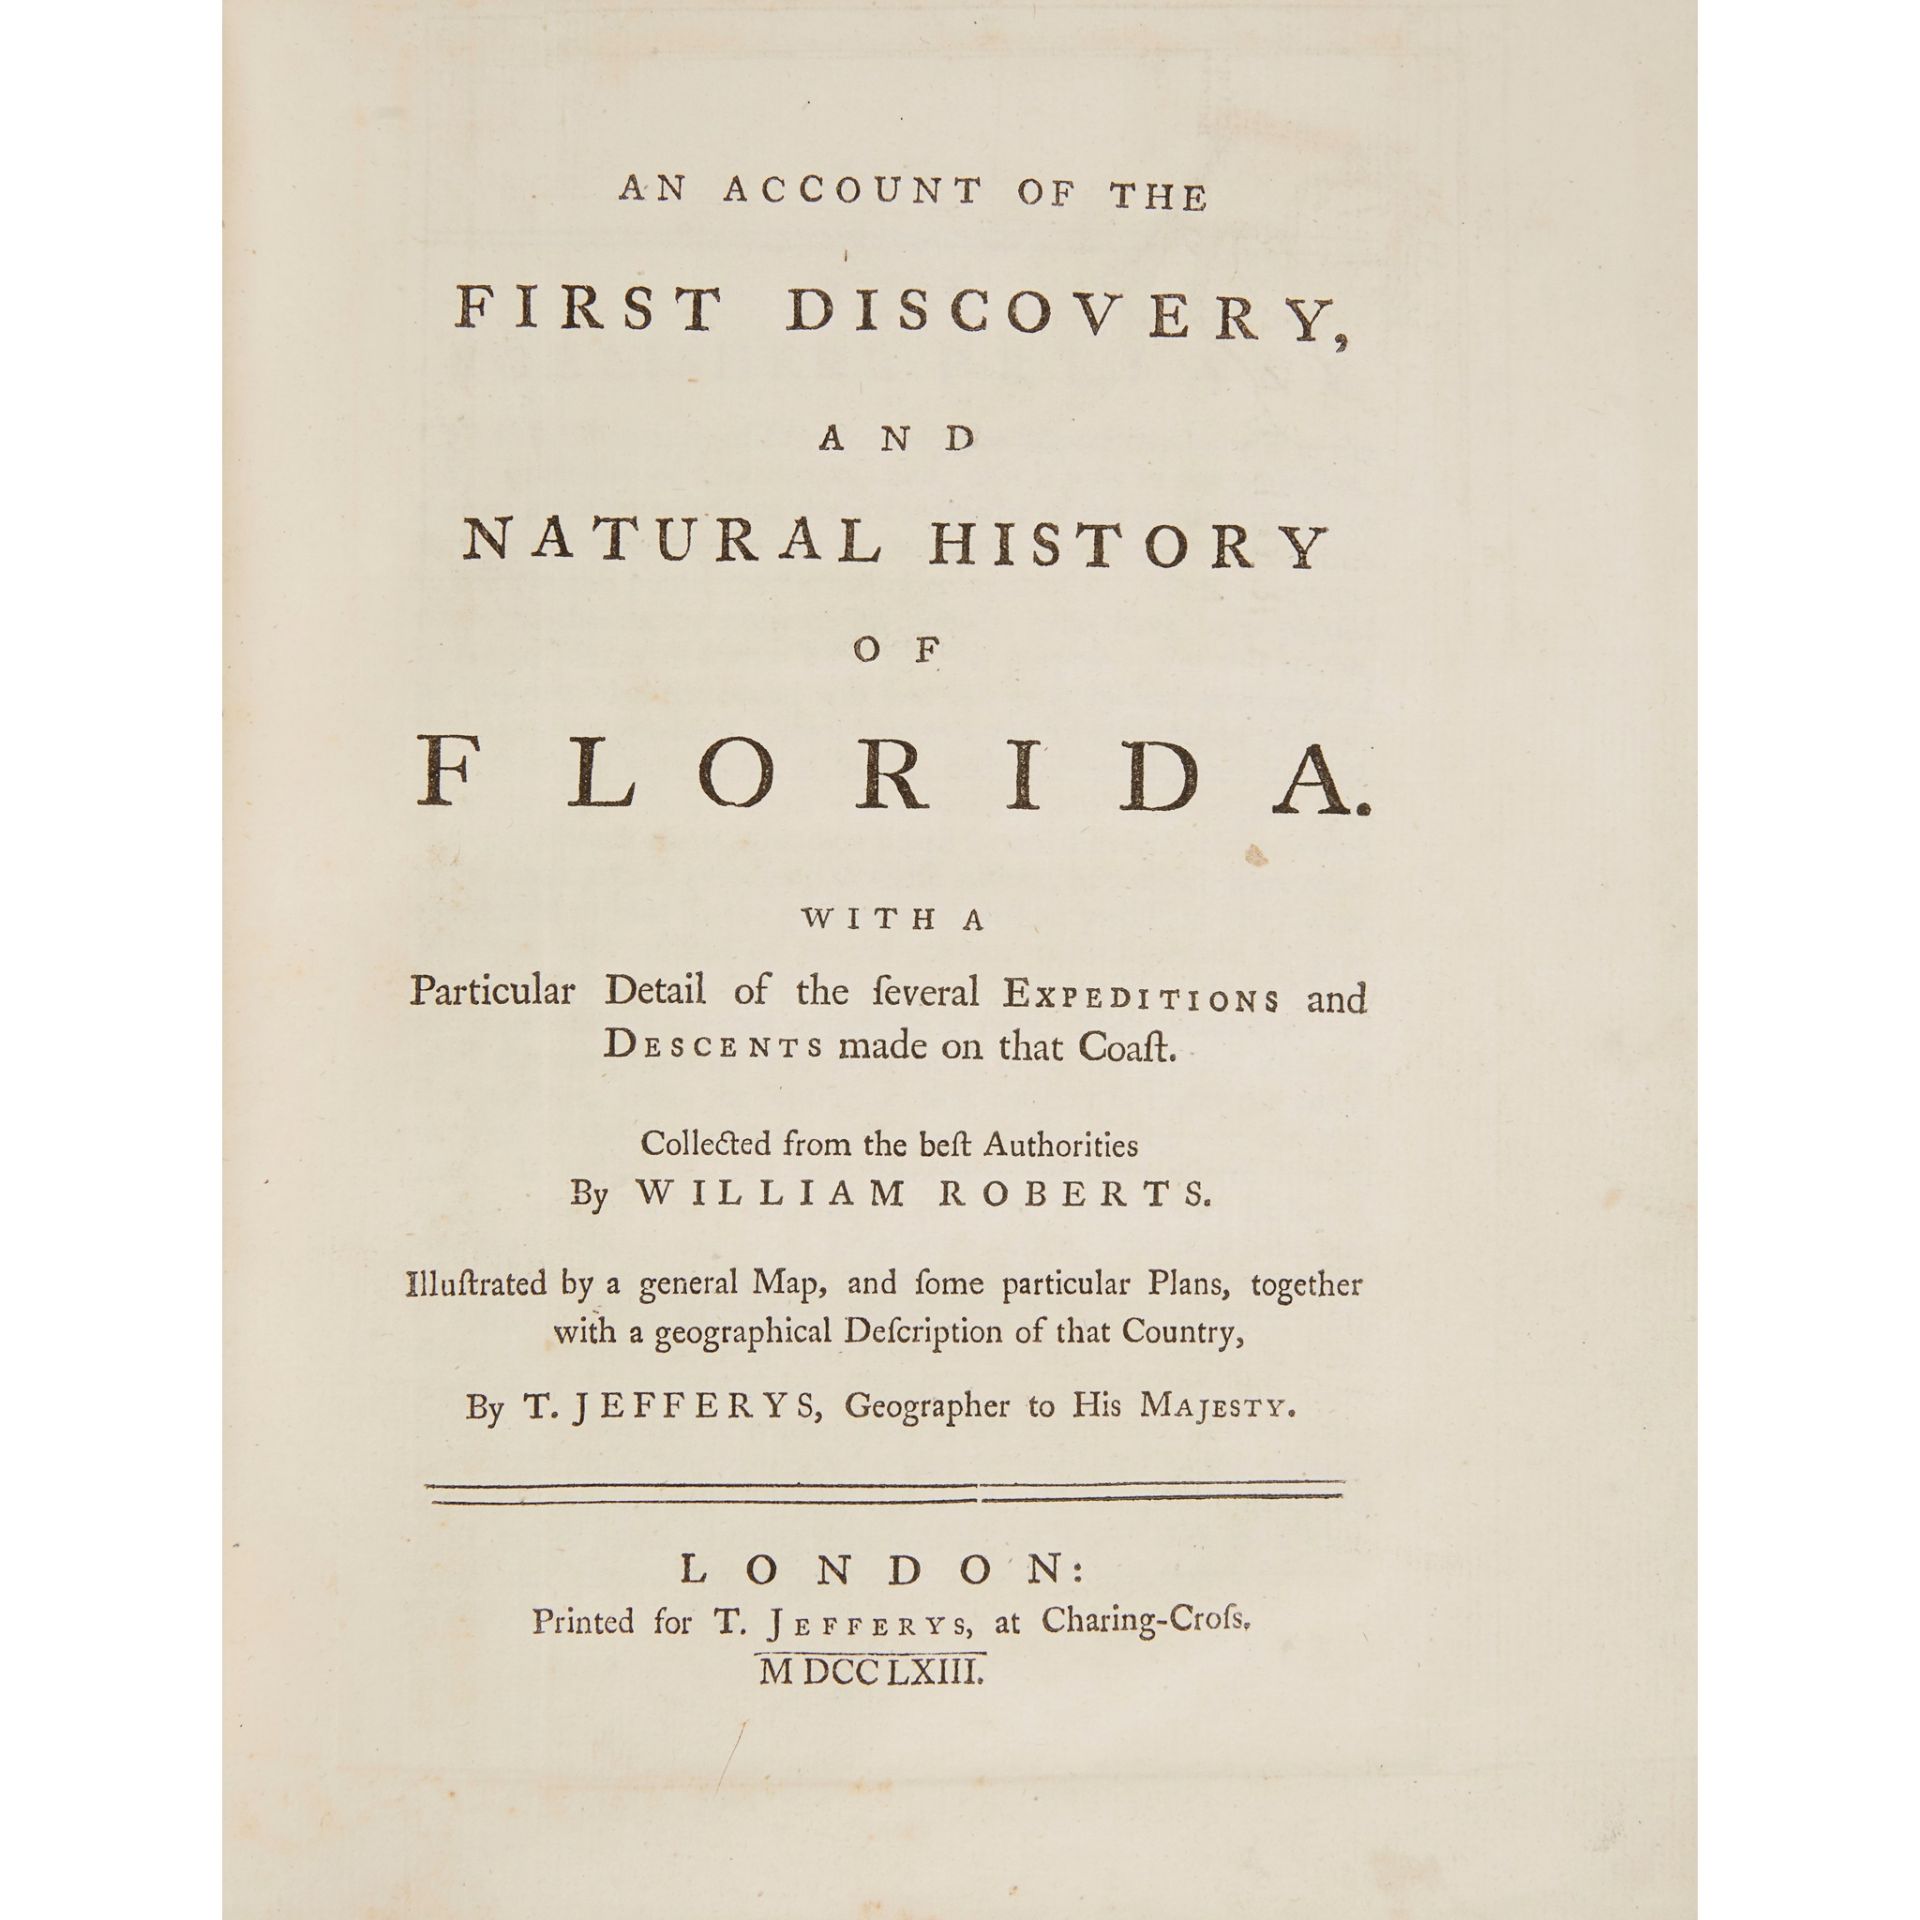 Roberts, William An Account of the First Discovery and Natural History of Florida